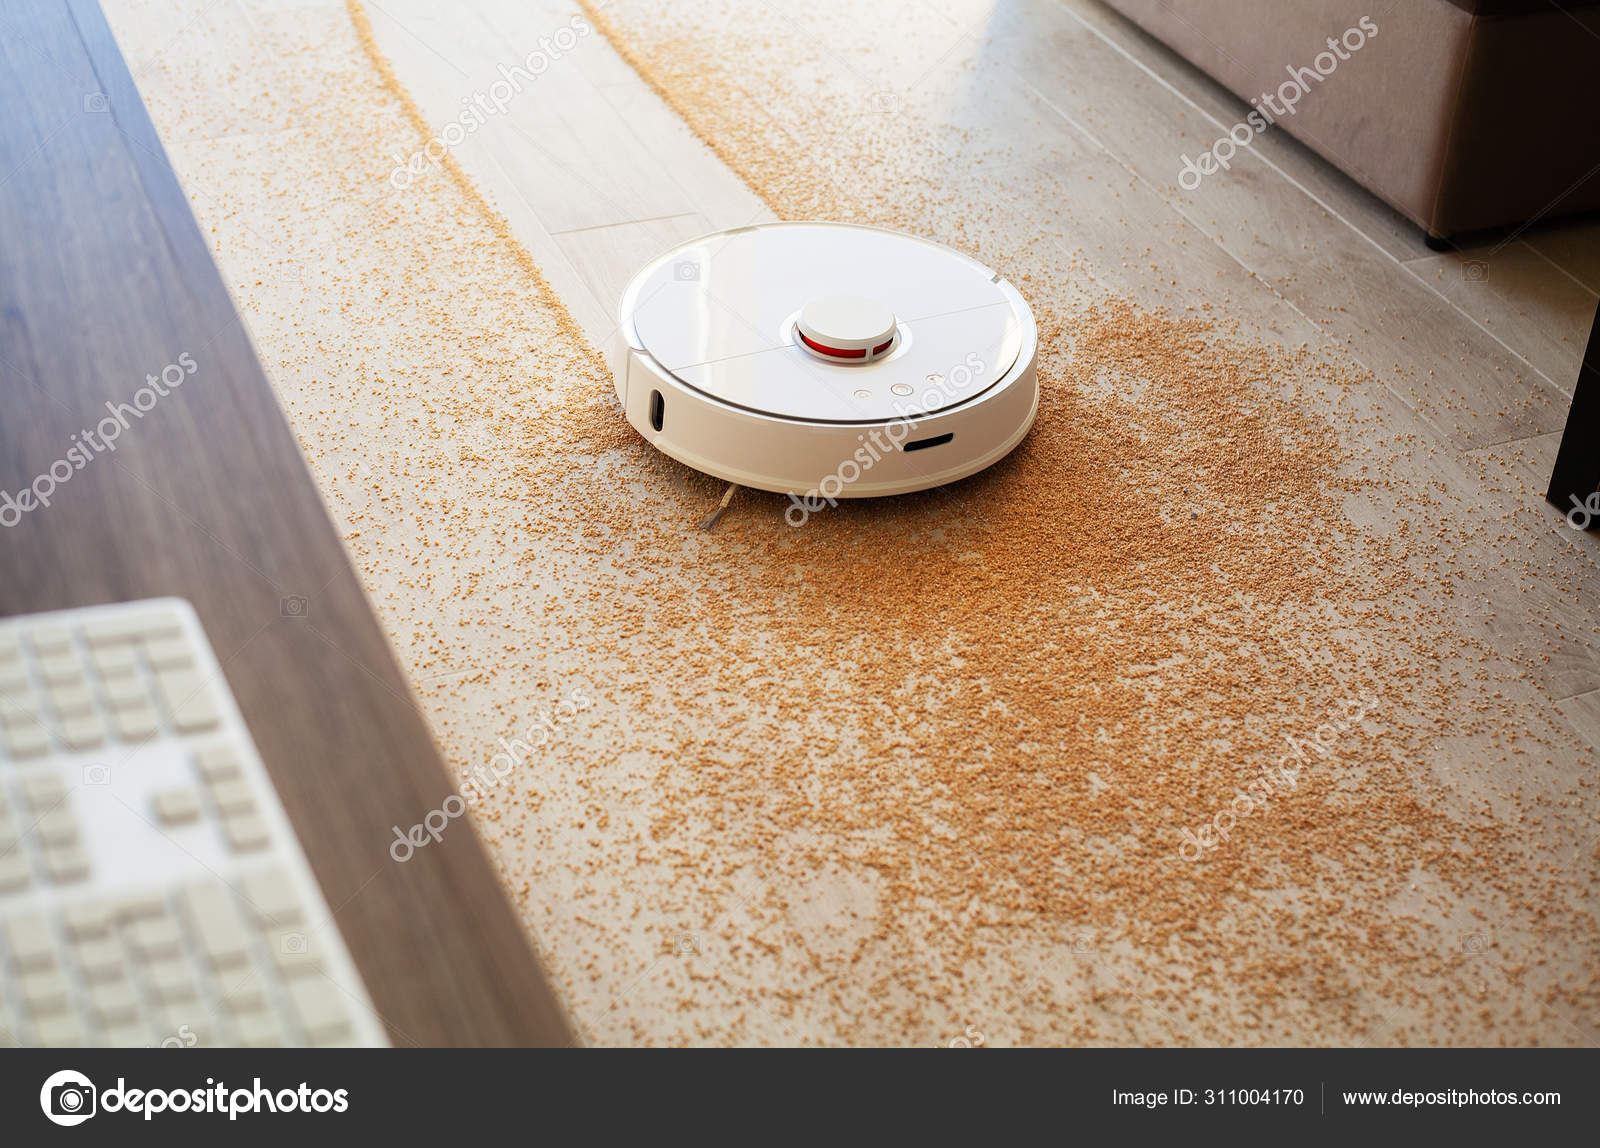 Smart Home Robot Vacuum Cleaner Performs Automatic Cleaning Of